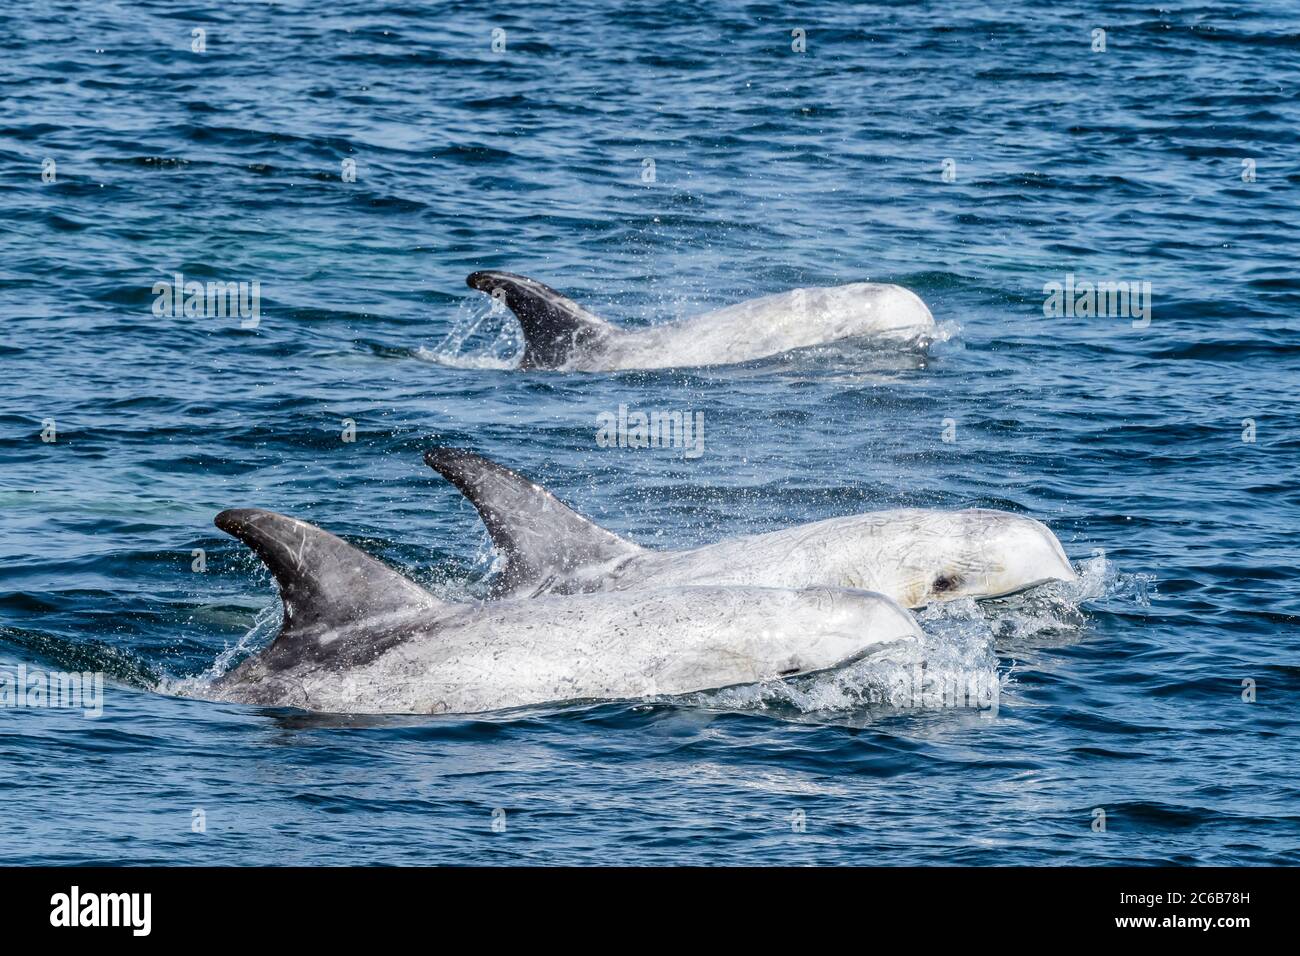 Adult Risso's dolphins (Grampus griseus) surfacing in Monterey Bay National Marine Sanctuary, California, United States of America, North America Stock Photo